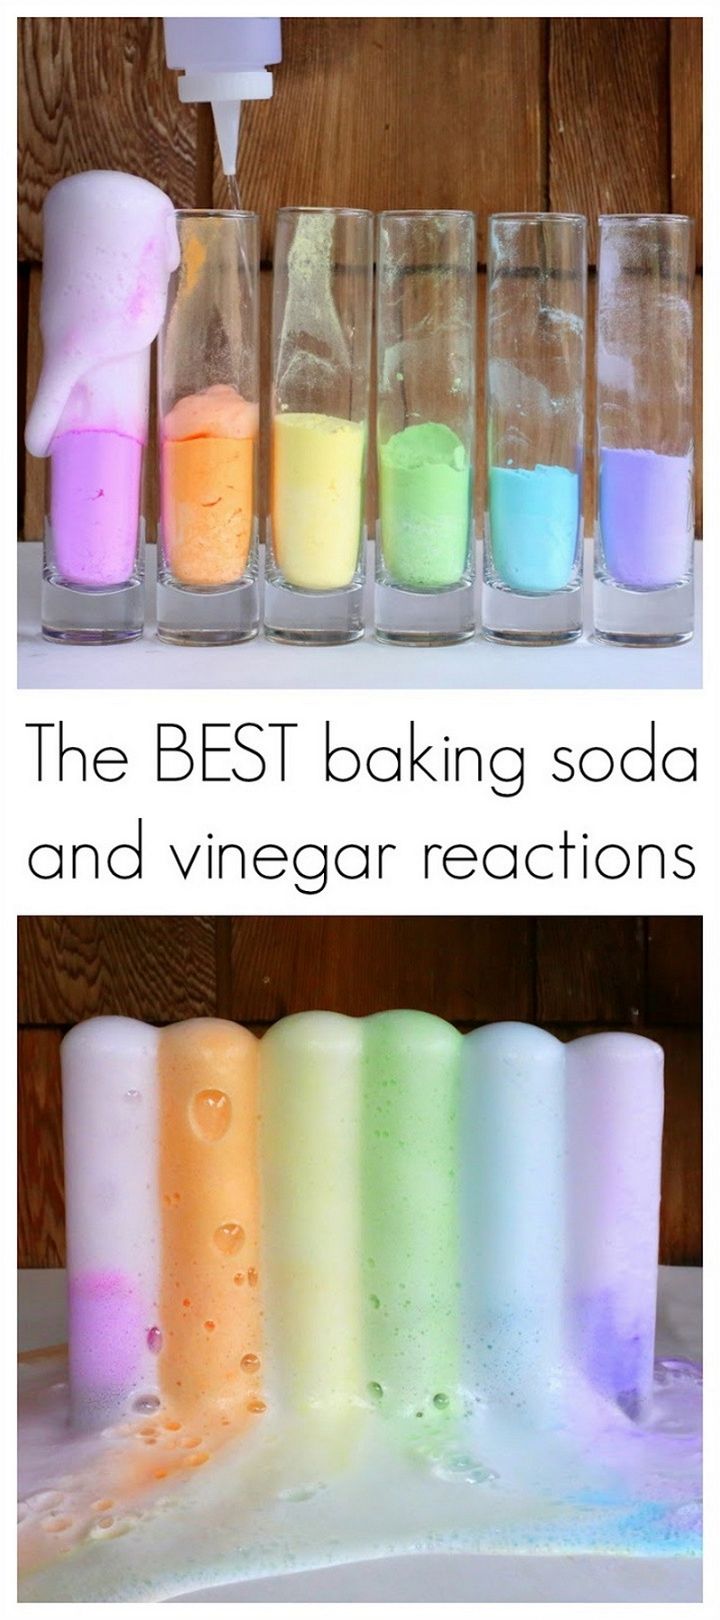 How To Get The Best Baking Soda And Vinegar Reaction